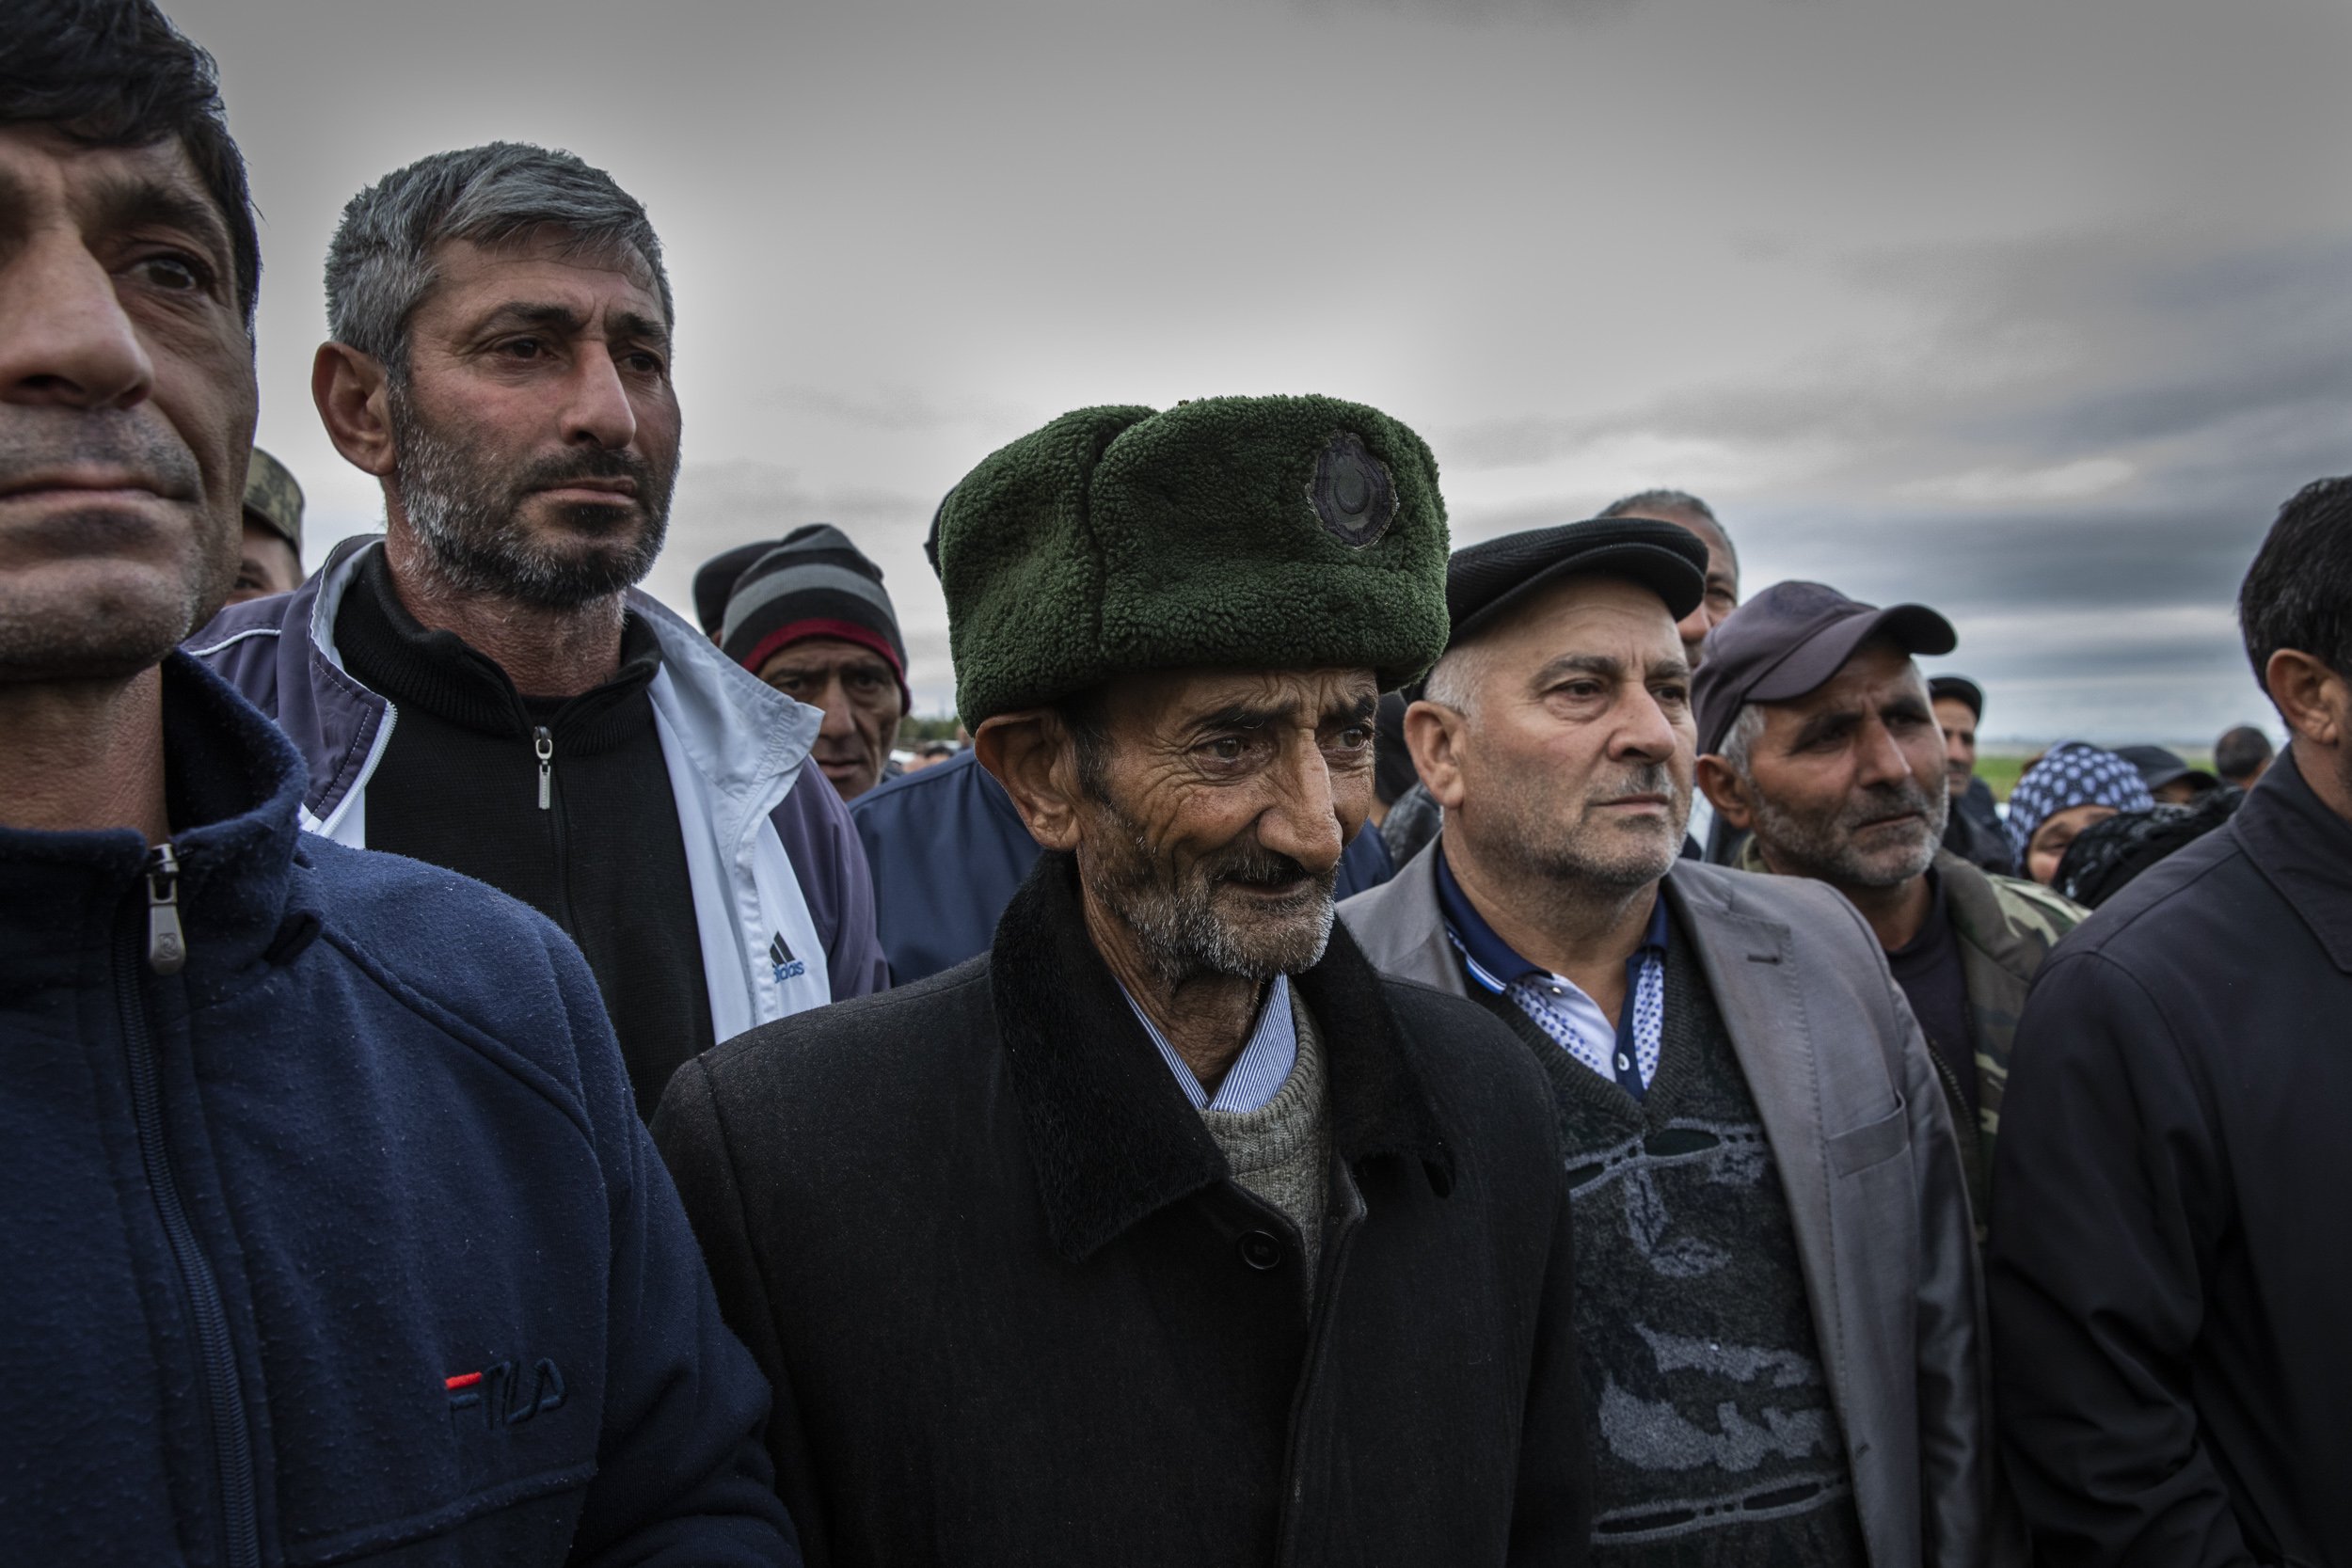  Friends and family members looked on as the body of Amar Isakli was taken away to be buried at the nearest cemetery in the frontline city of Terter.  